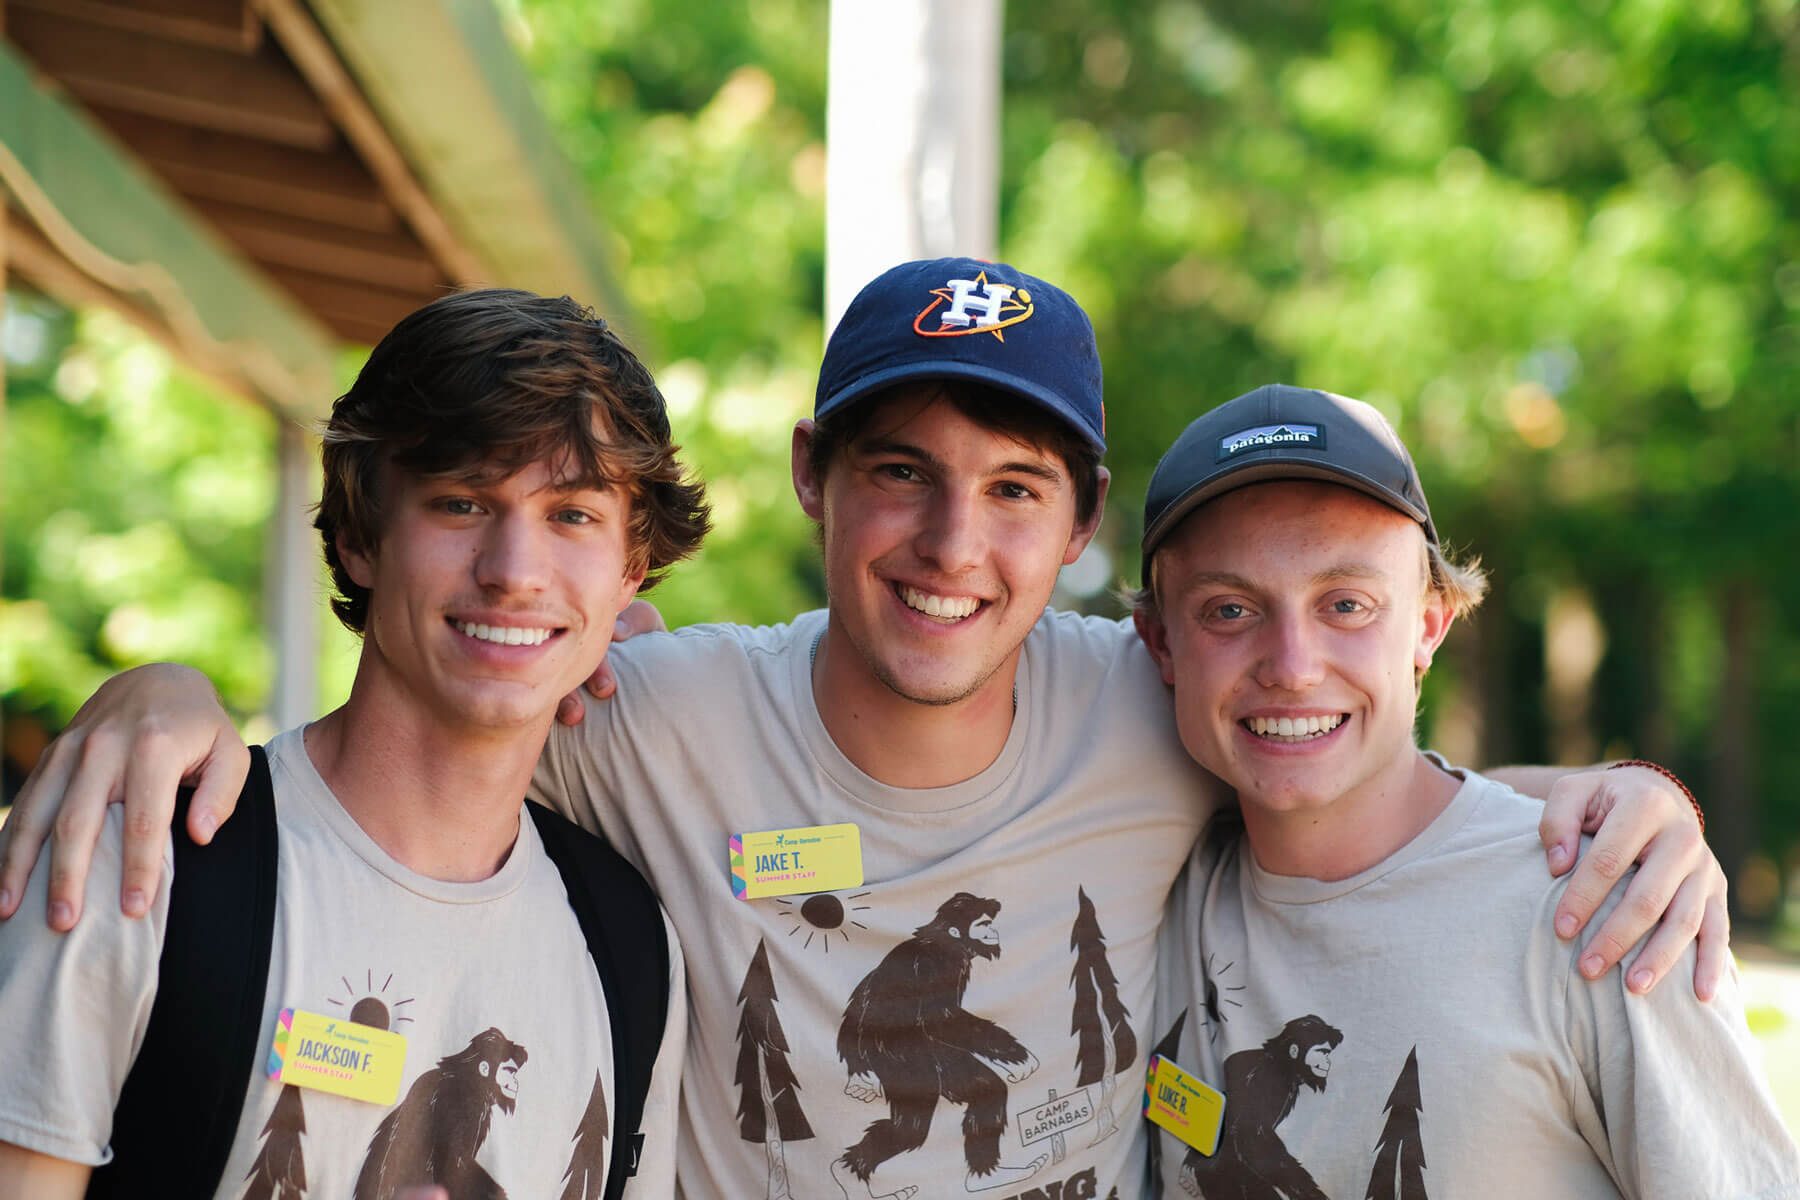 Camp counselors smiling, wearing hats